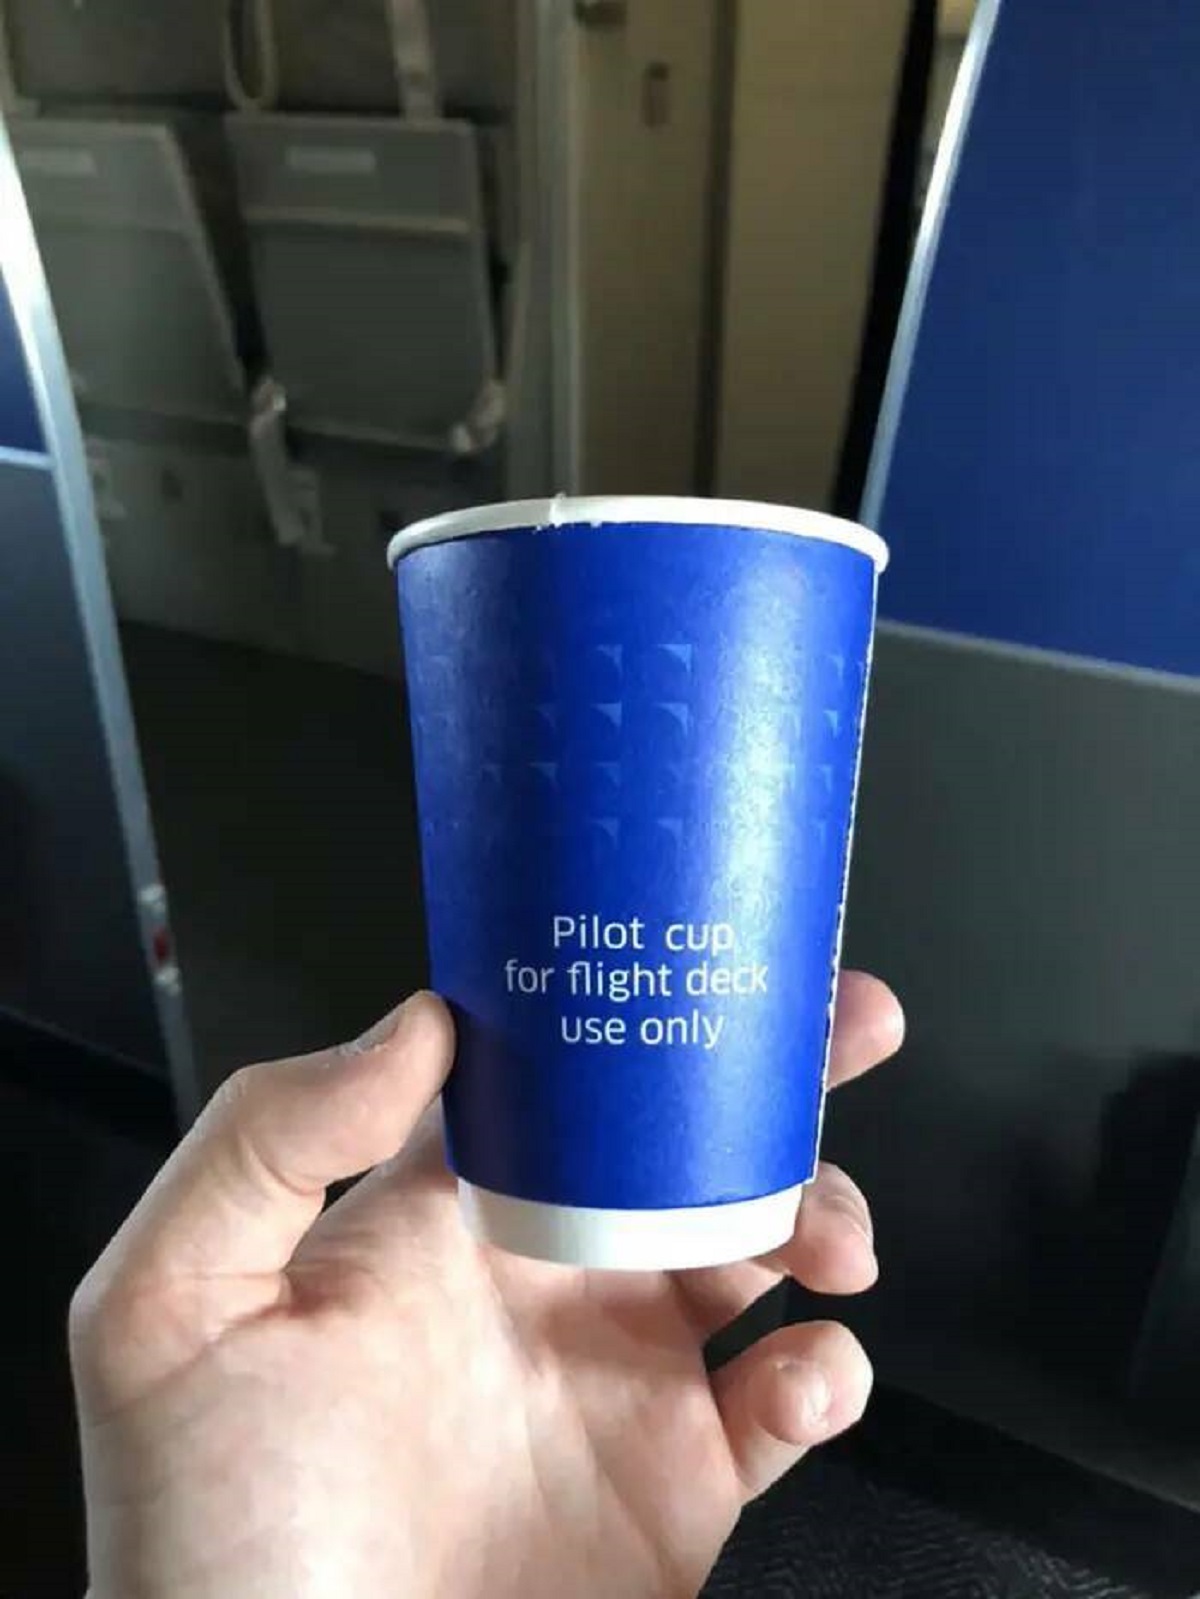 pilot cup for flight deck - Pilot cup for flight deck use only